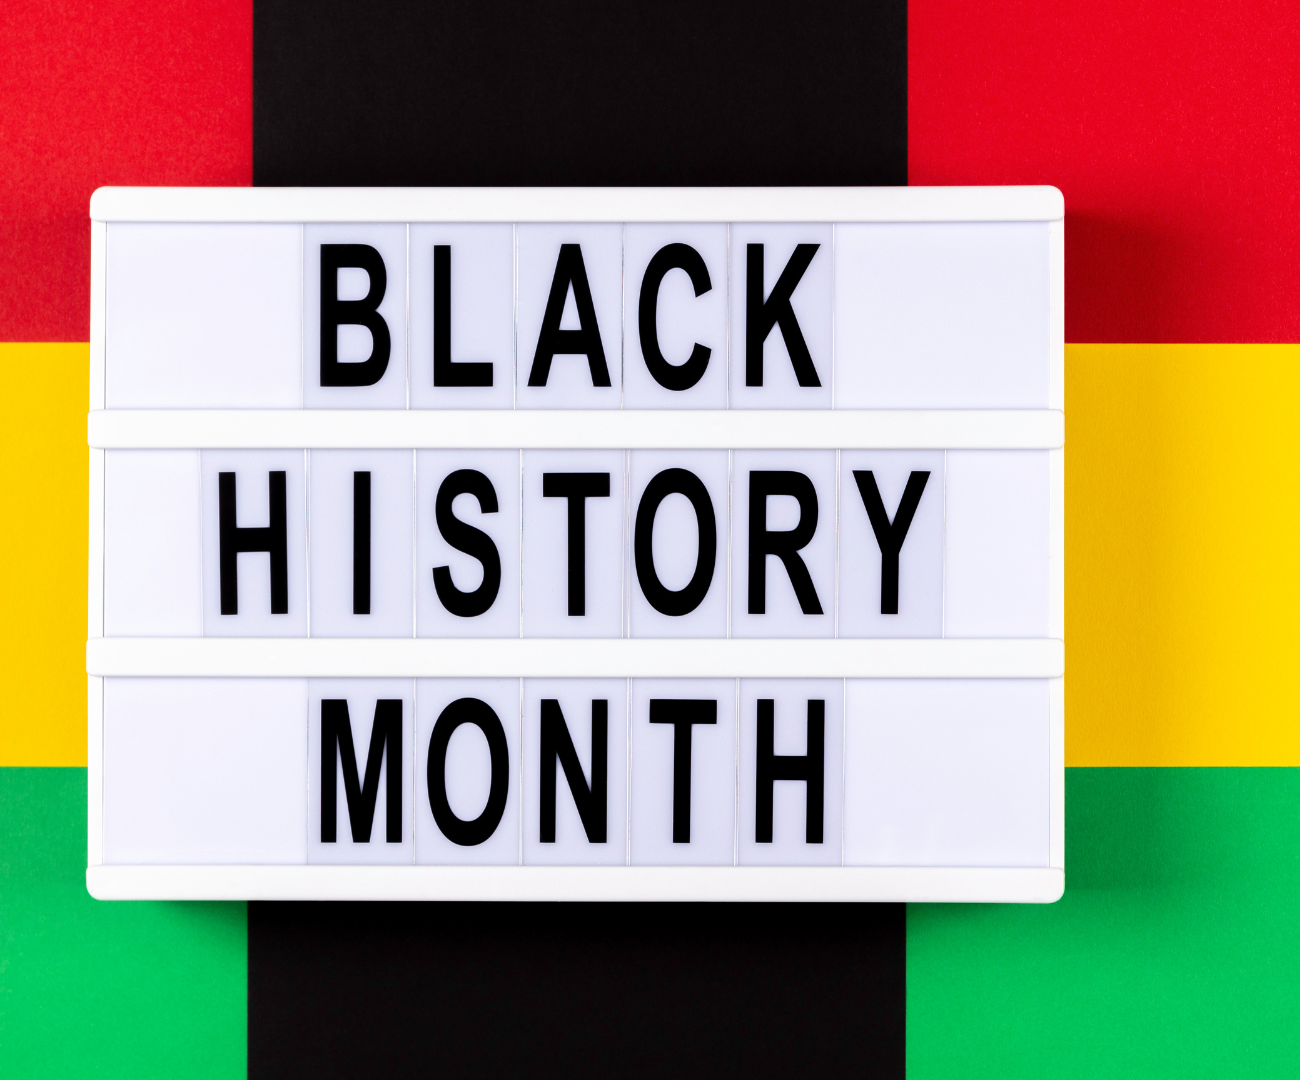 Five Black History Month themes you need to know about